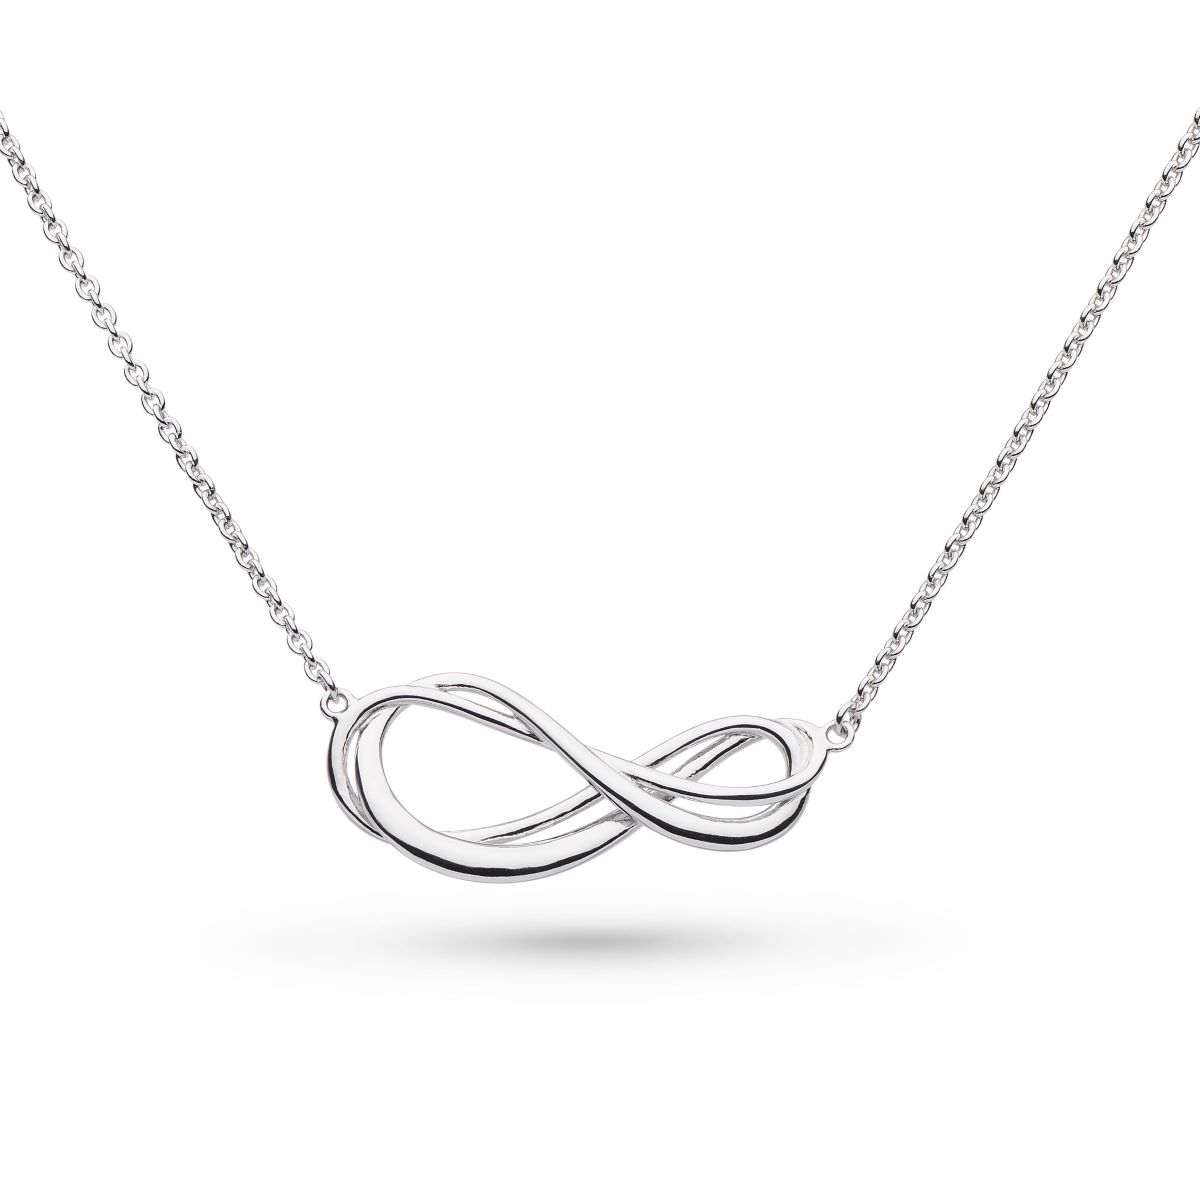 Kit Heath Silver Infinity Necklace - 91161RP